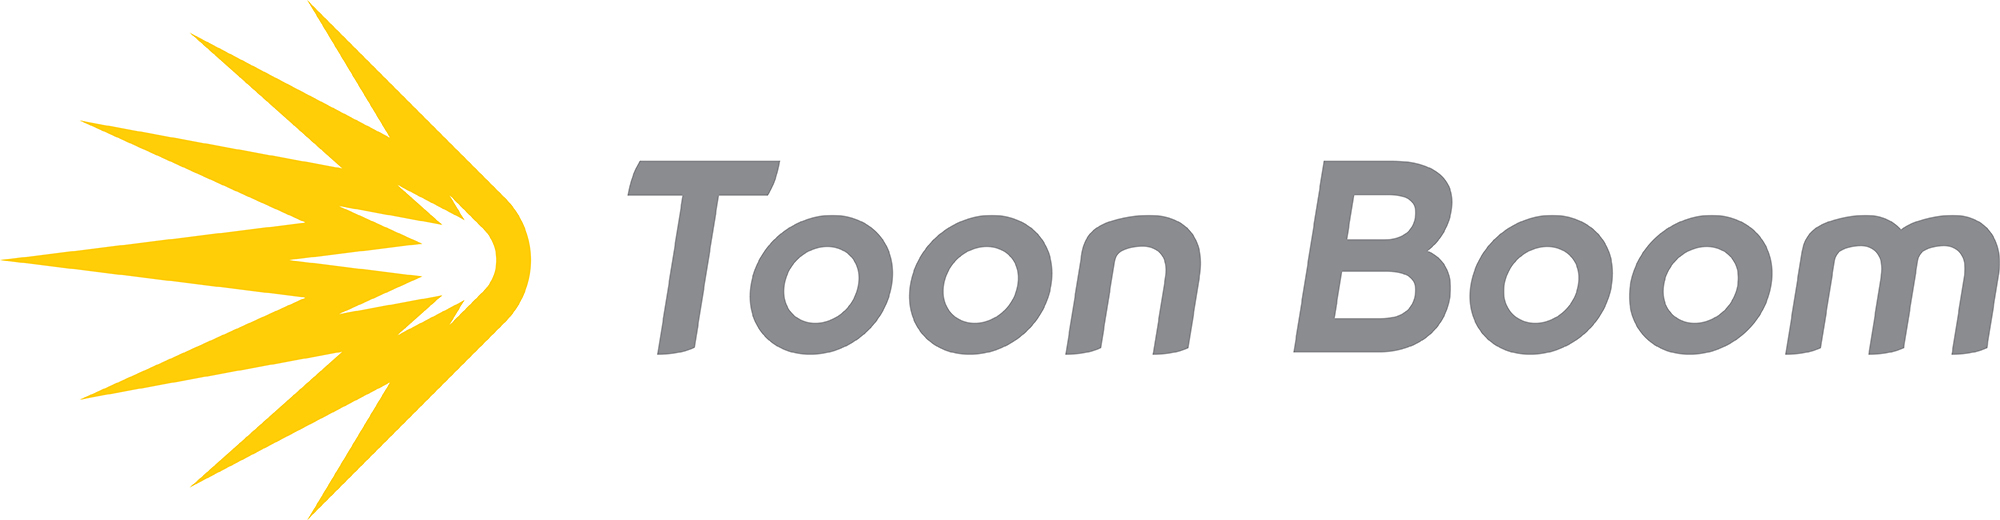 Toon Boom Launches S